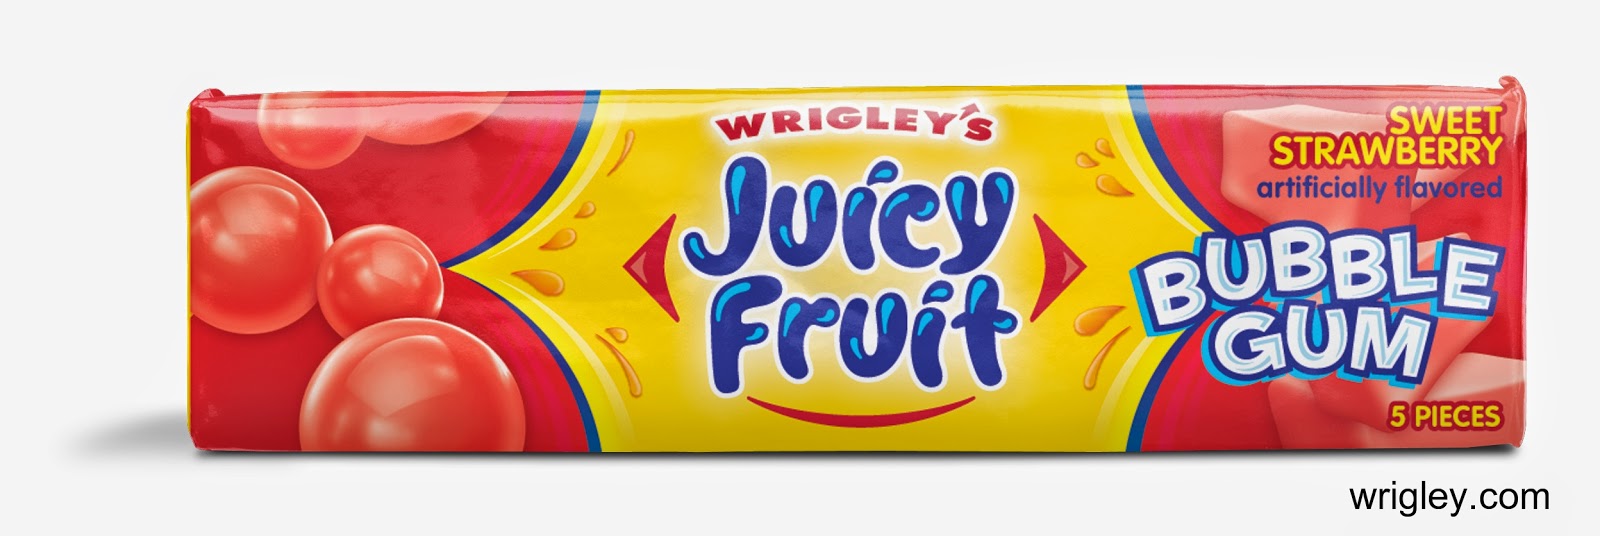 Juicy Fruit Bubble Gum will be available in packs of 5 pieces. 